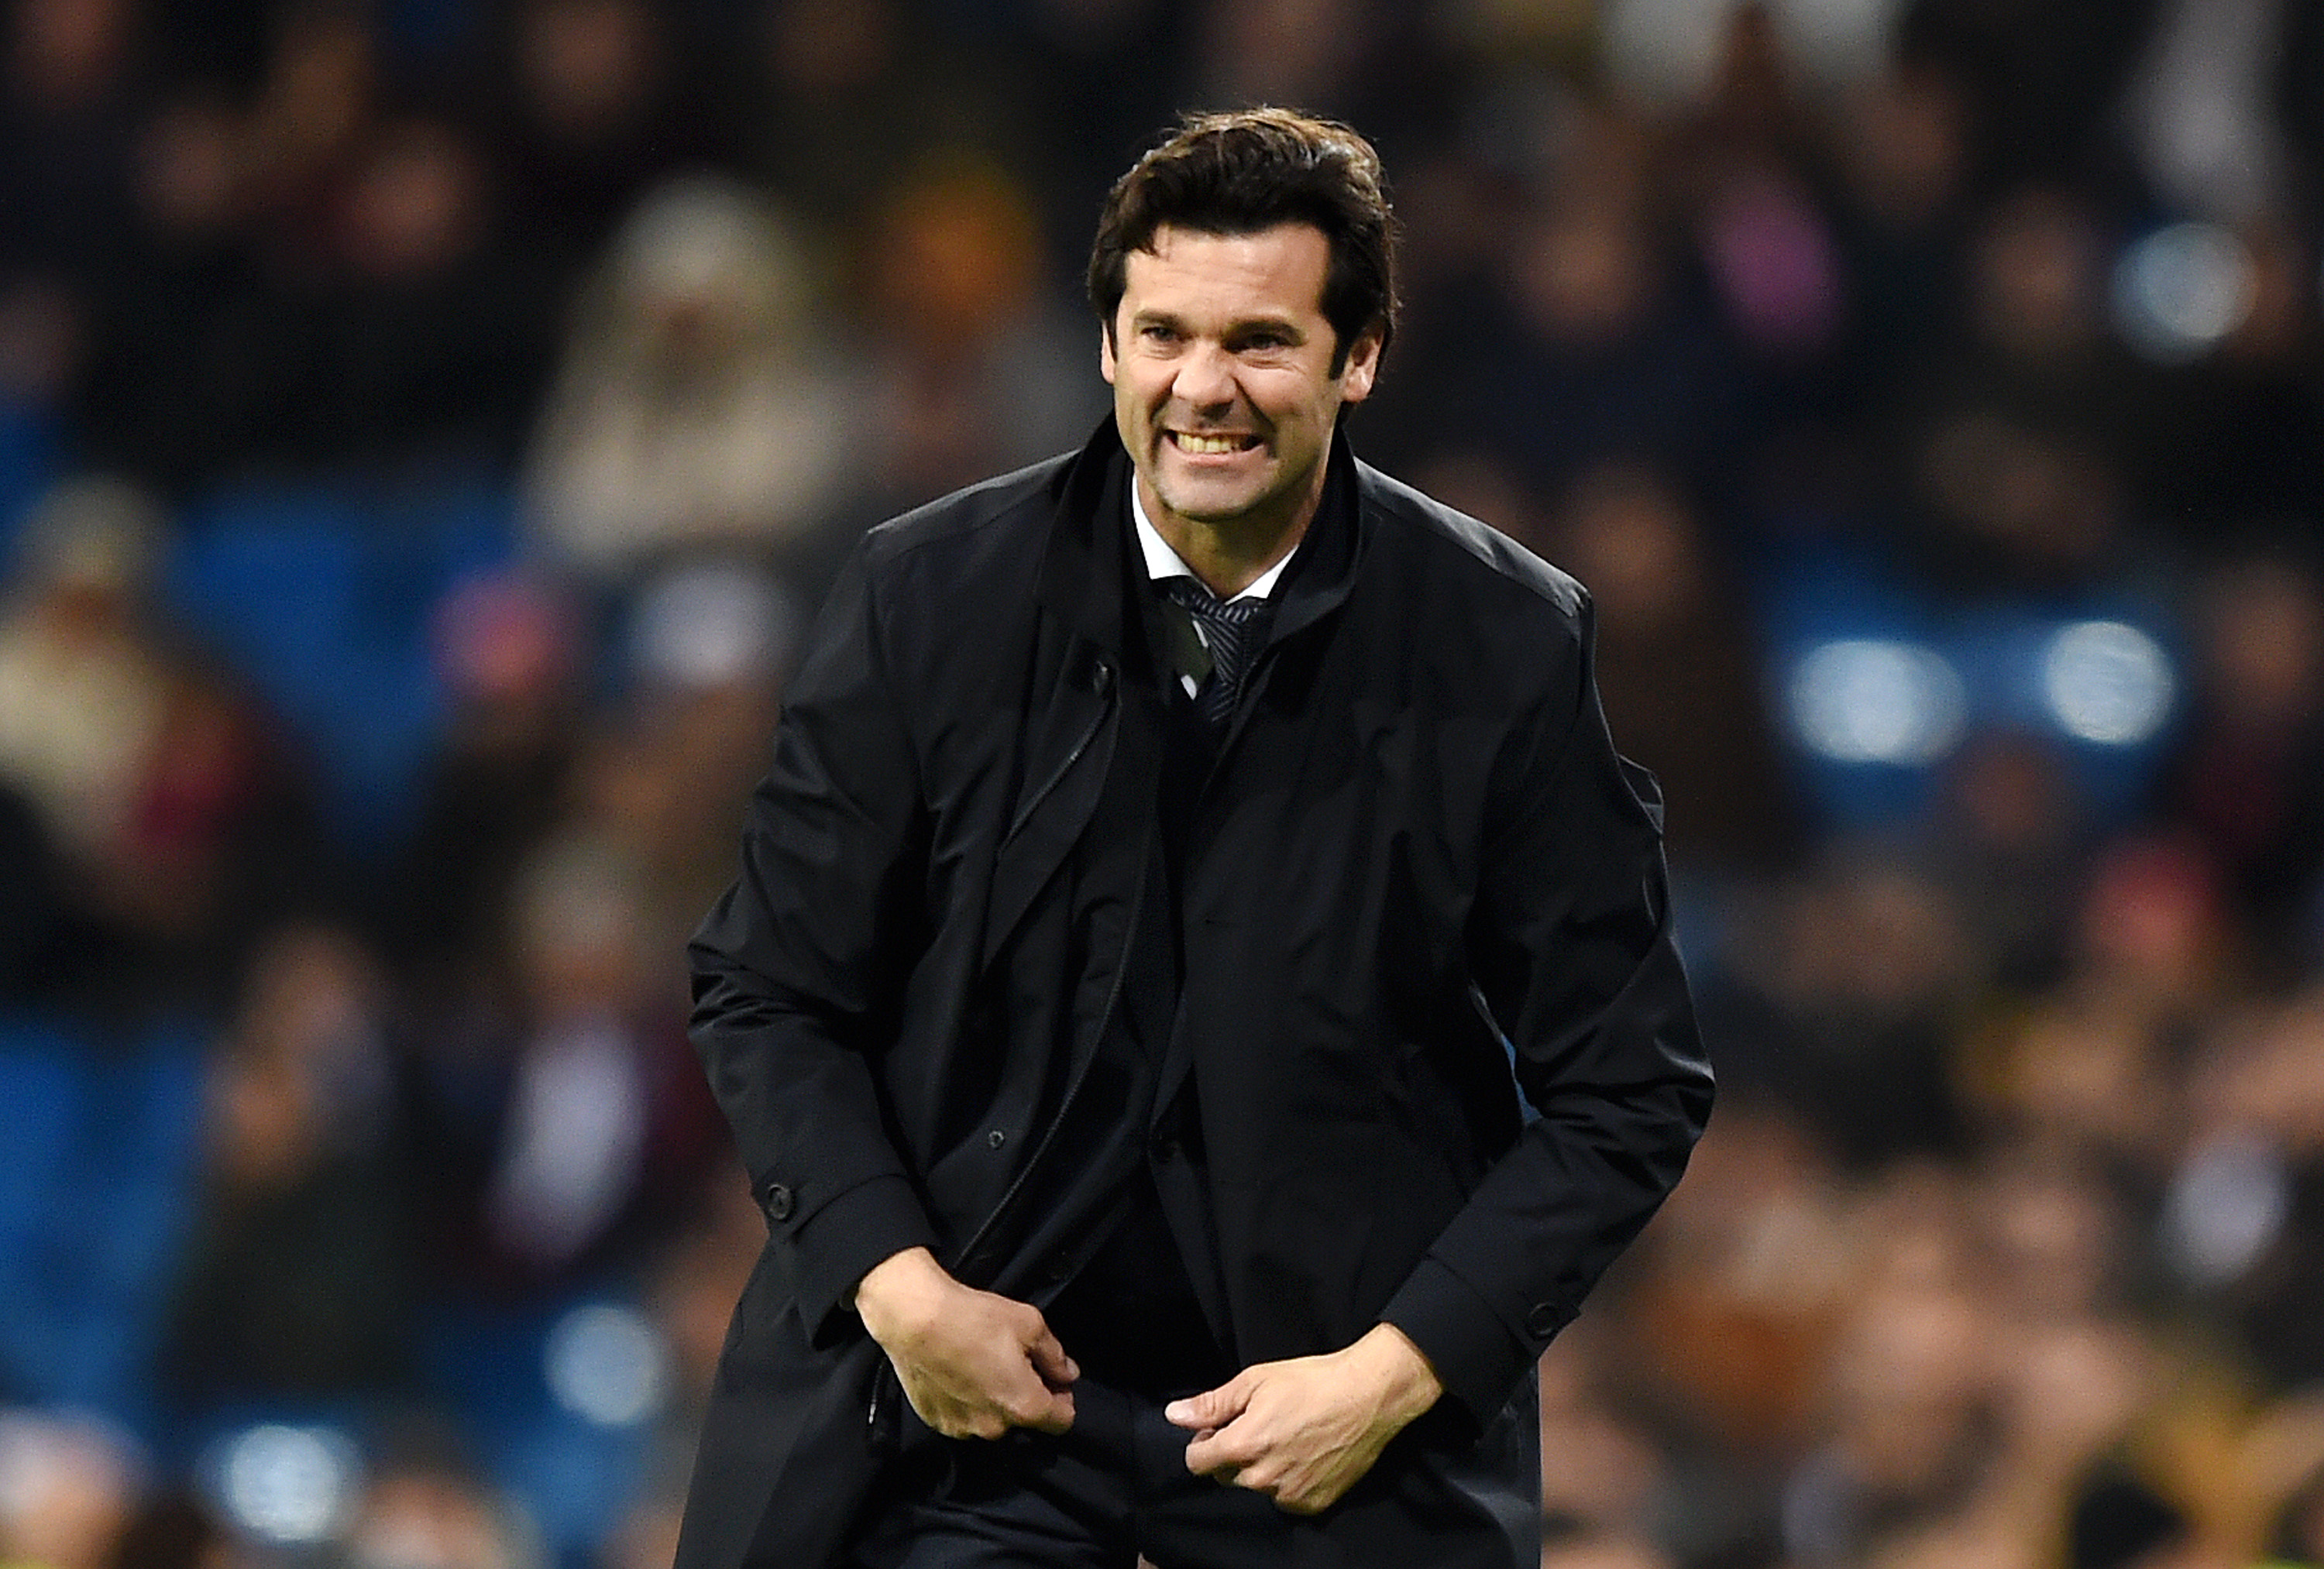 MADRID, SPAIN - DECEMBER 15:  Santiago Solari, Manager of Real Madrid looks on during the La Liga match between Real Madrid CF and Rayo Vallecano de Madrid at Estadio Santiago Bernabeu on December 15, 2018 in Madrid, Spain.  (Photo by Denis Doyle/Getty Images)